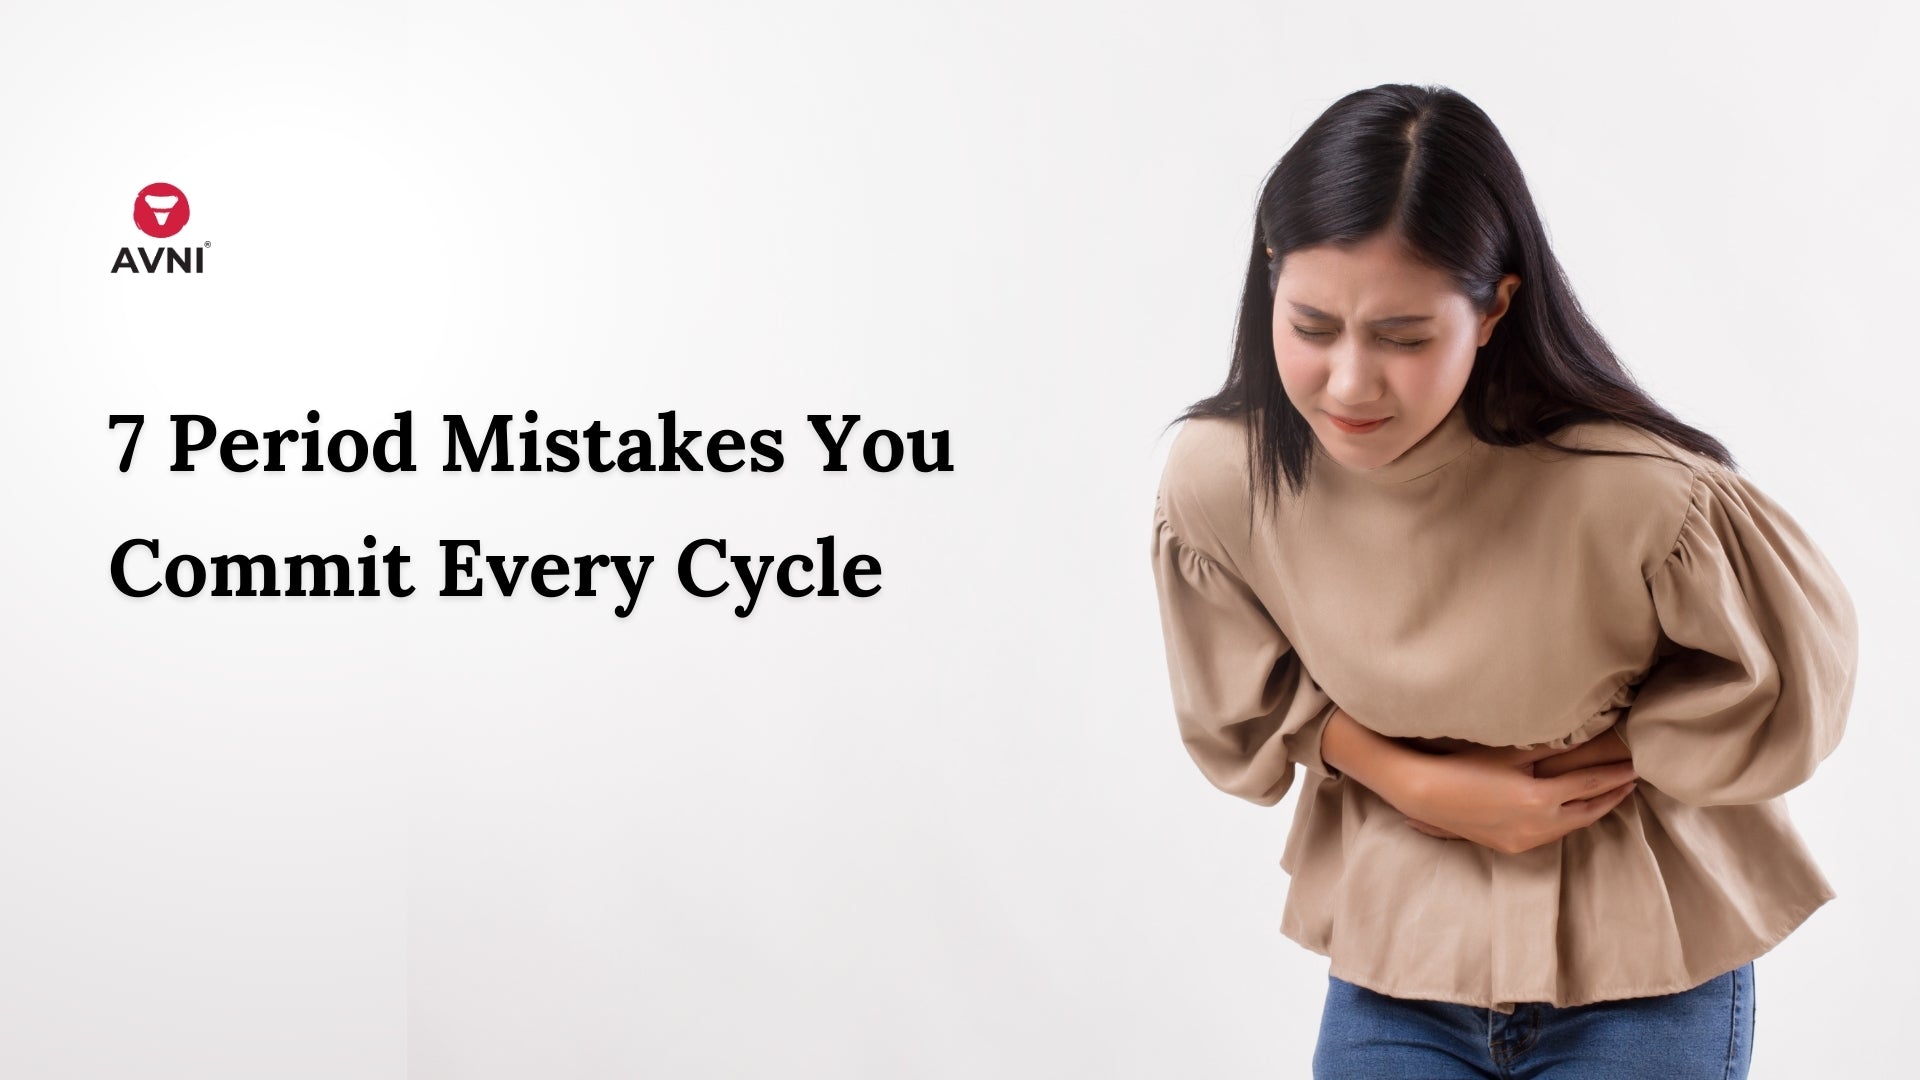 7 Period Mistakes You Commit Every Cycle